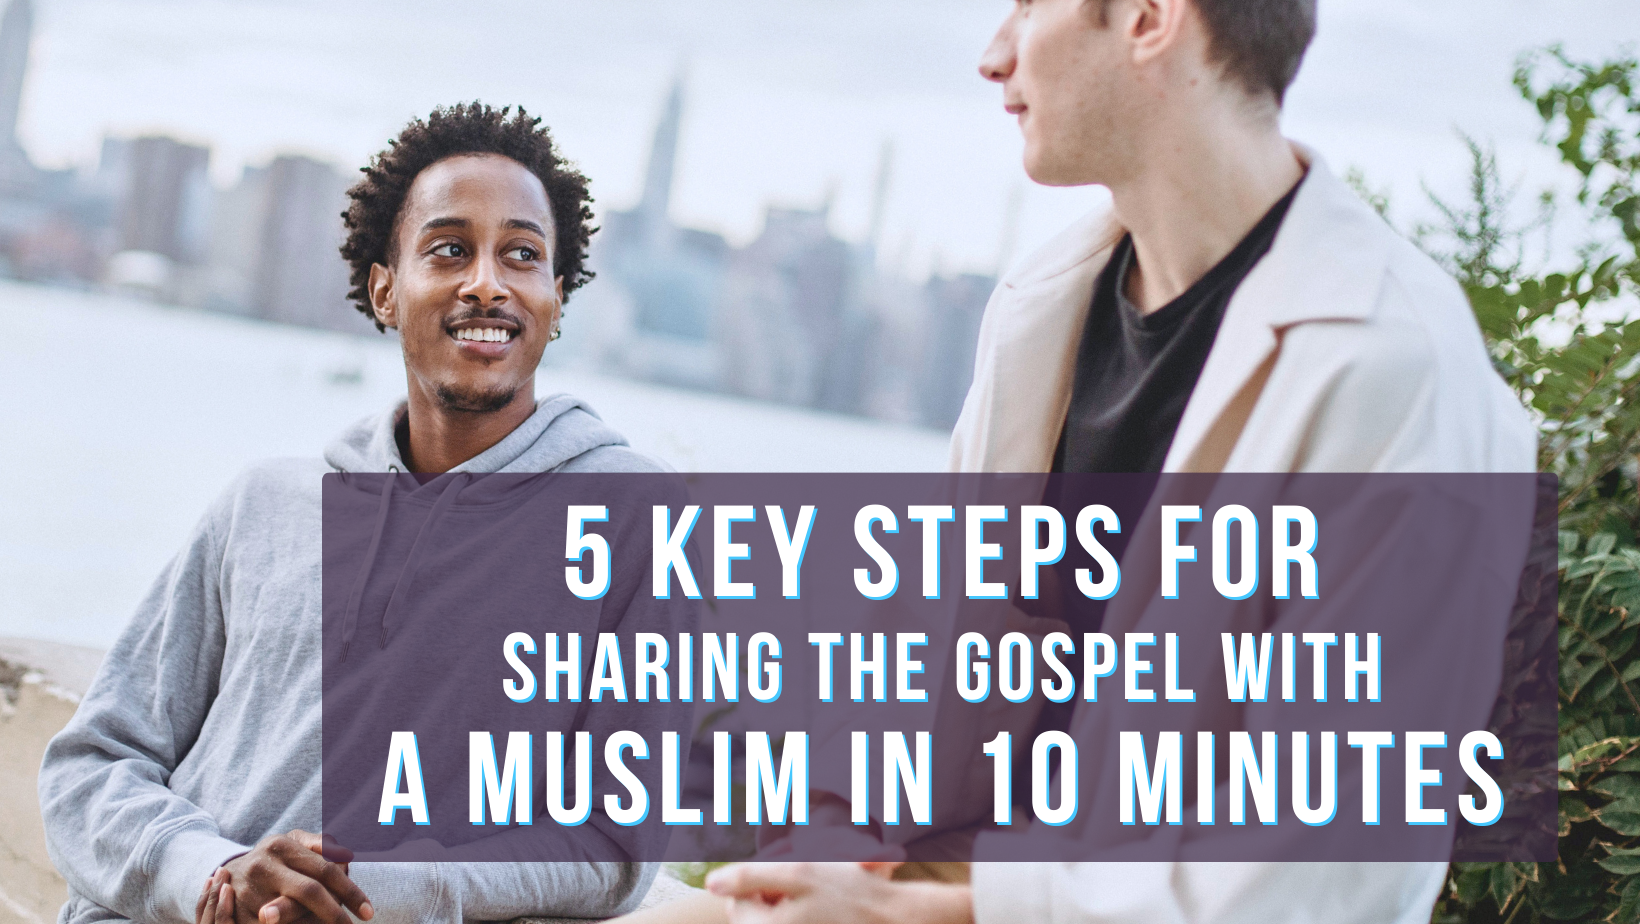 5 key steps for sharing the gospel with a Muslim in 10 minutes